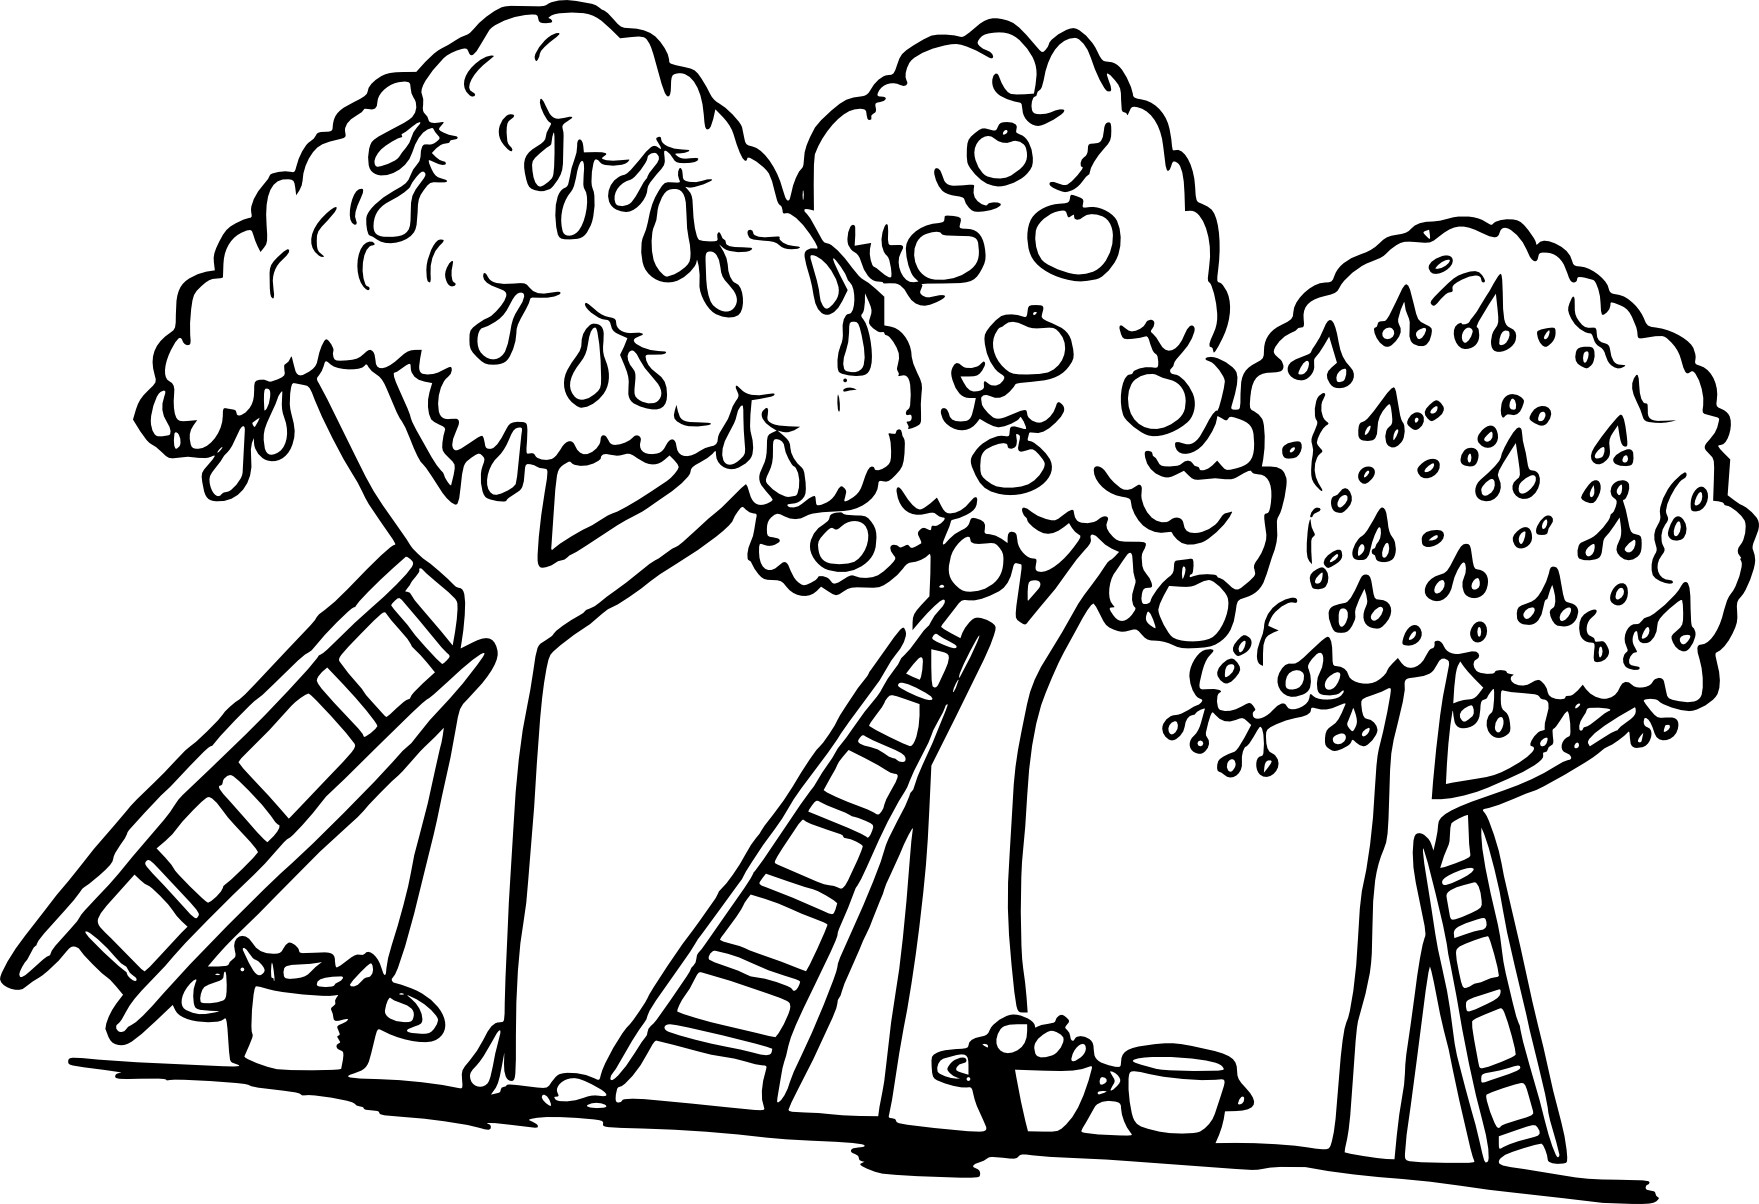 Apple Trees coloring page